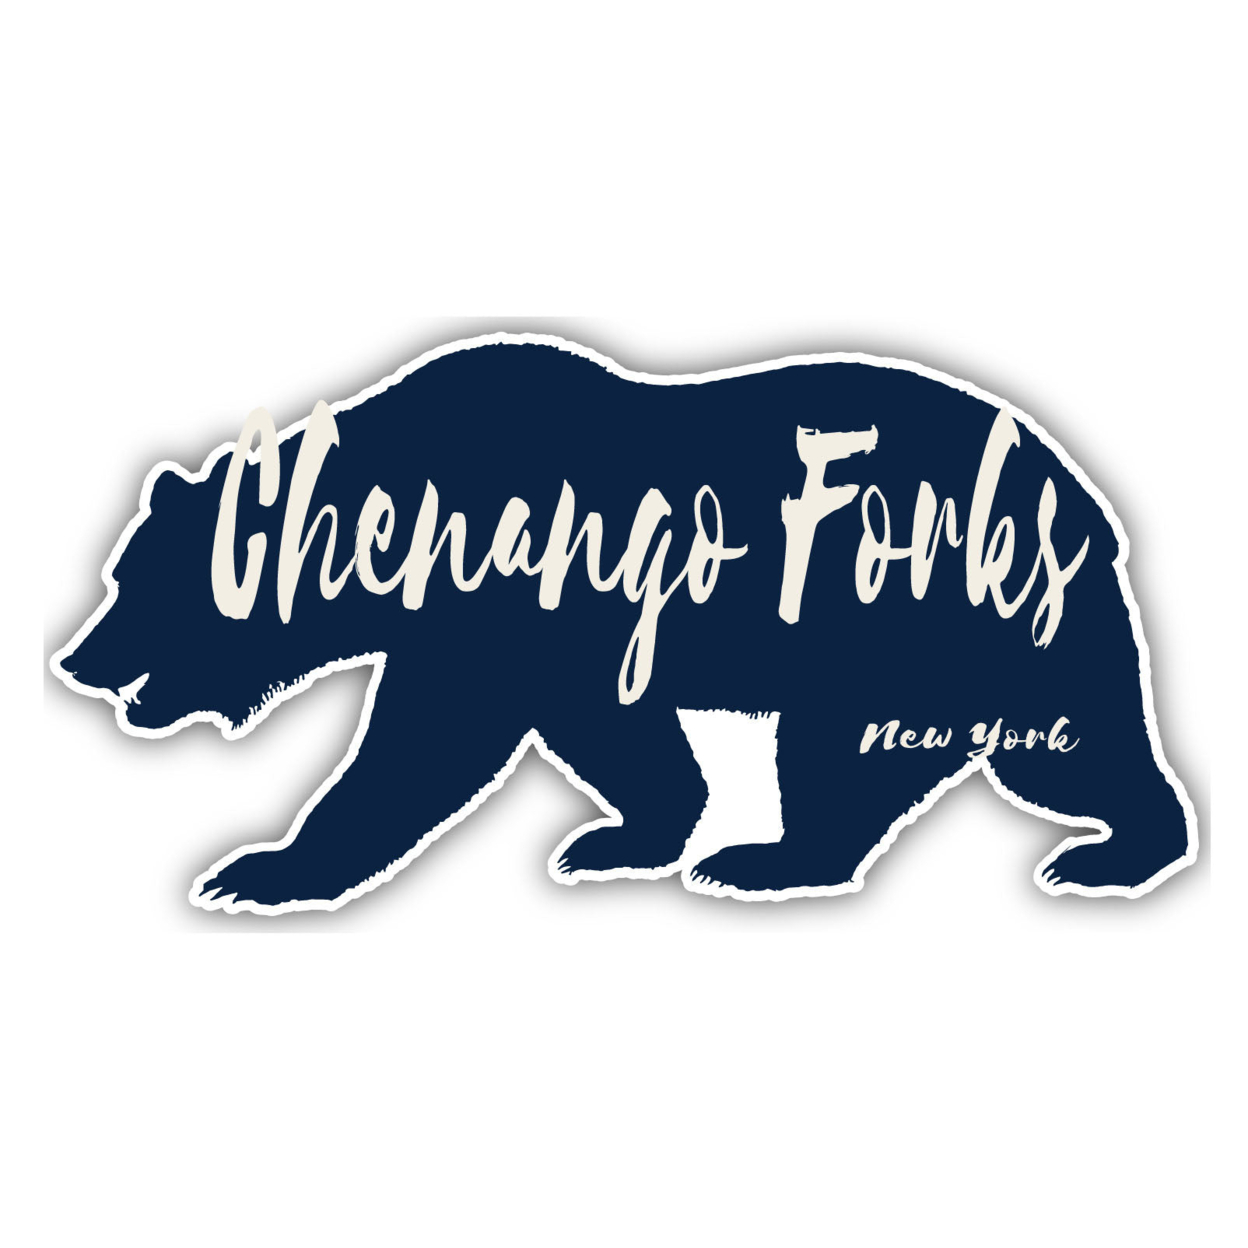 Chenango Forks New York Souvenir Decorative Stickers (Choose Theme And Size) - 4-Pack, 6-Inch, Bear